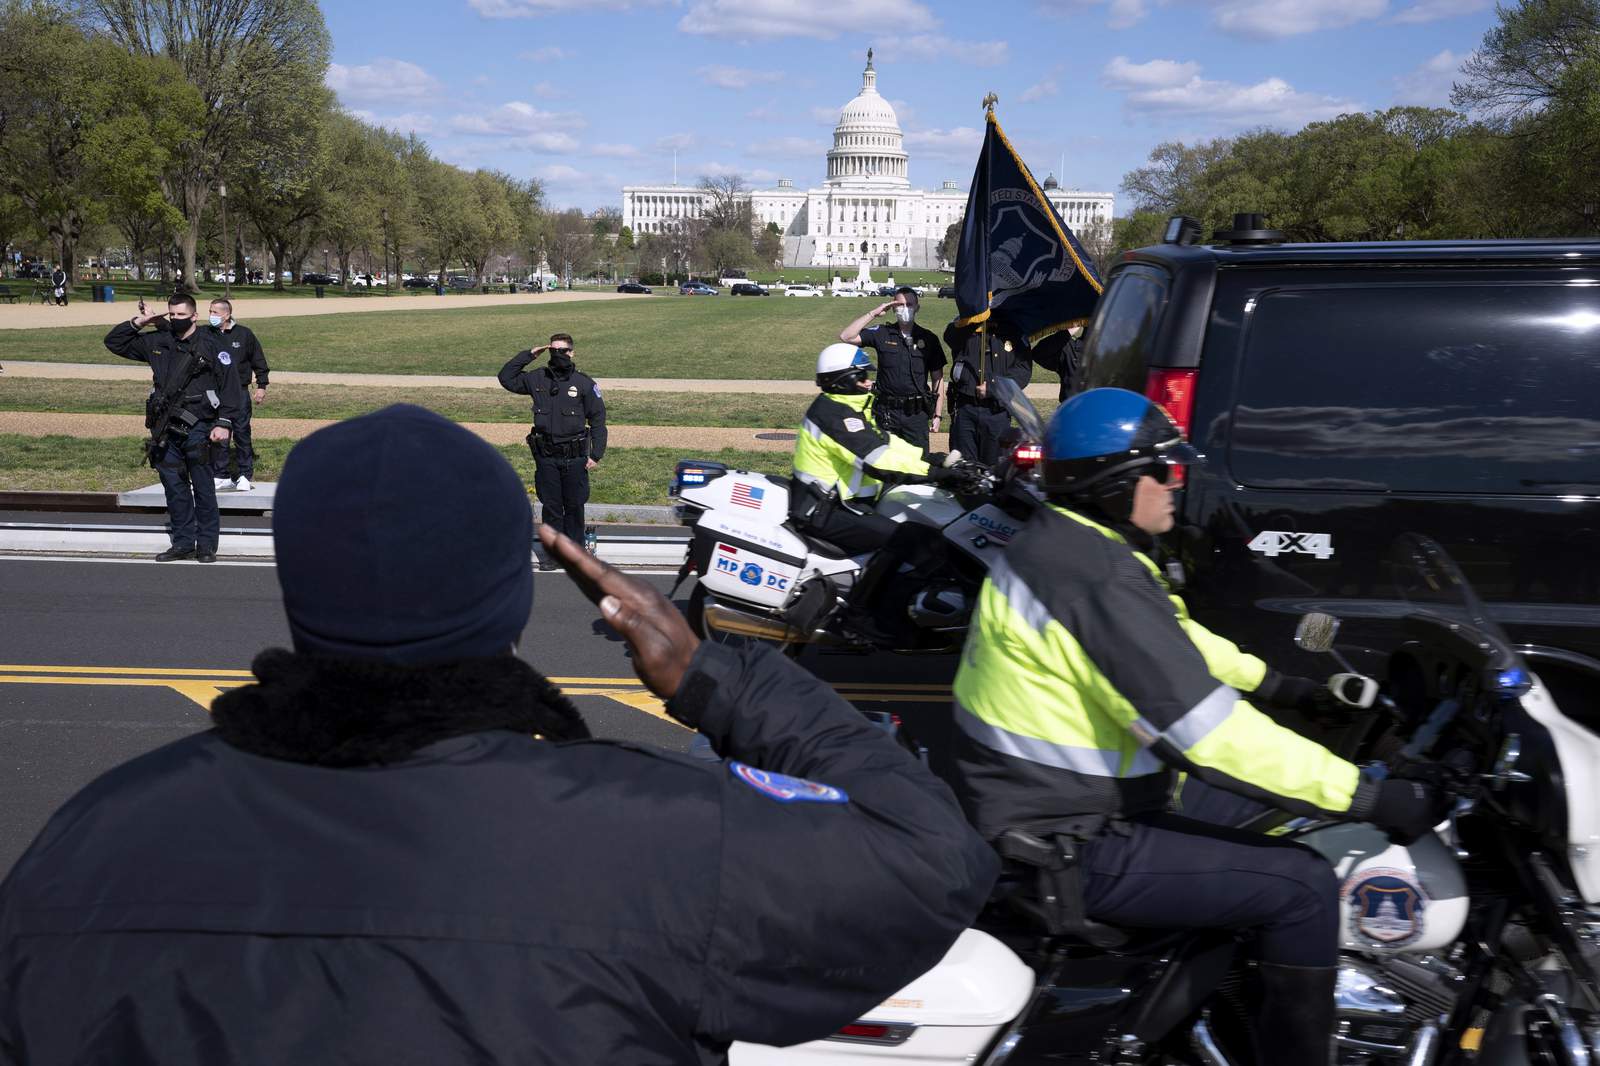 Latest attack pushes US Capitol police further toward crisis